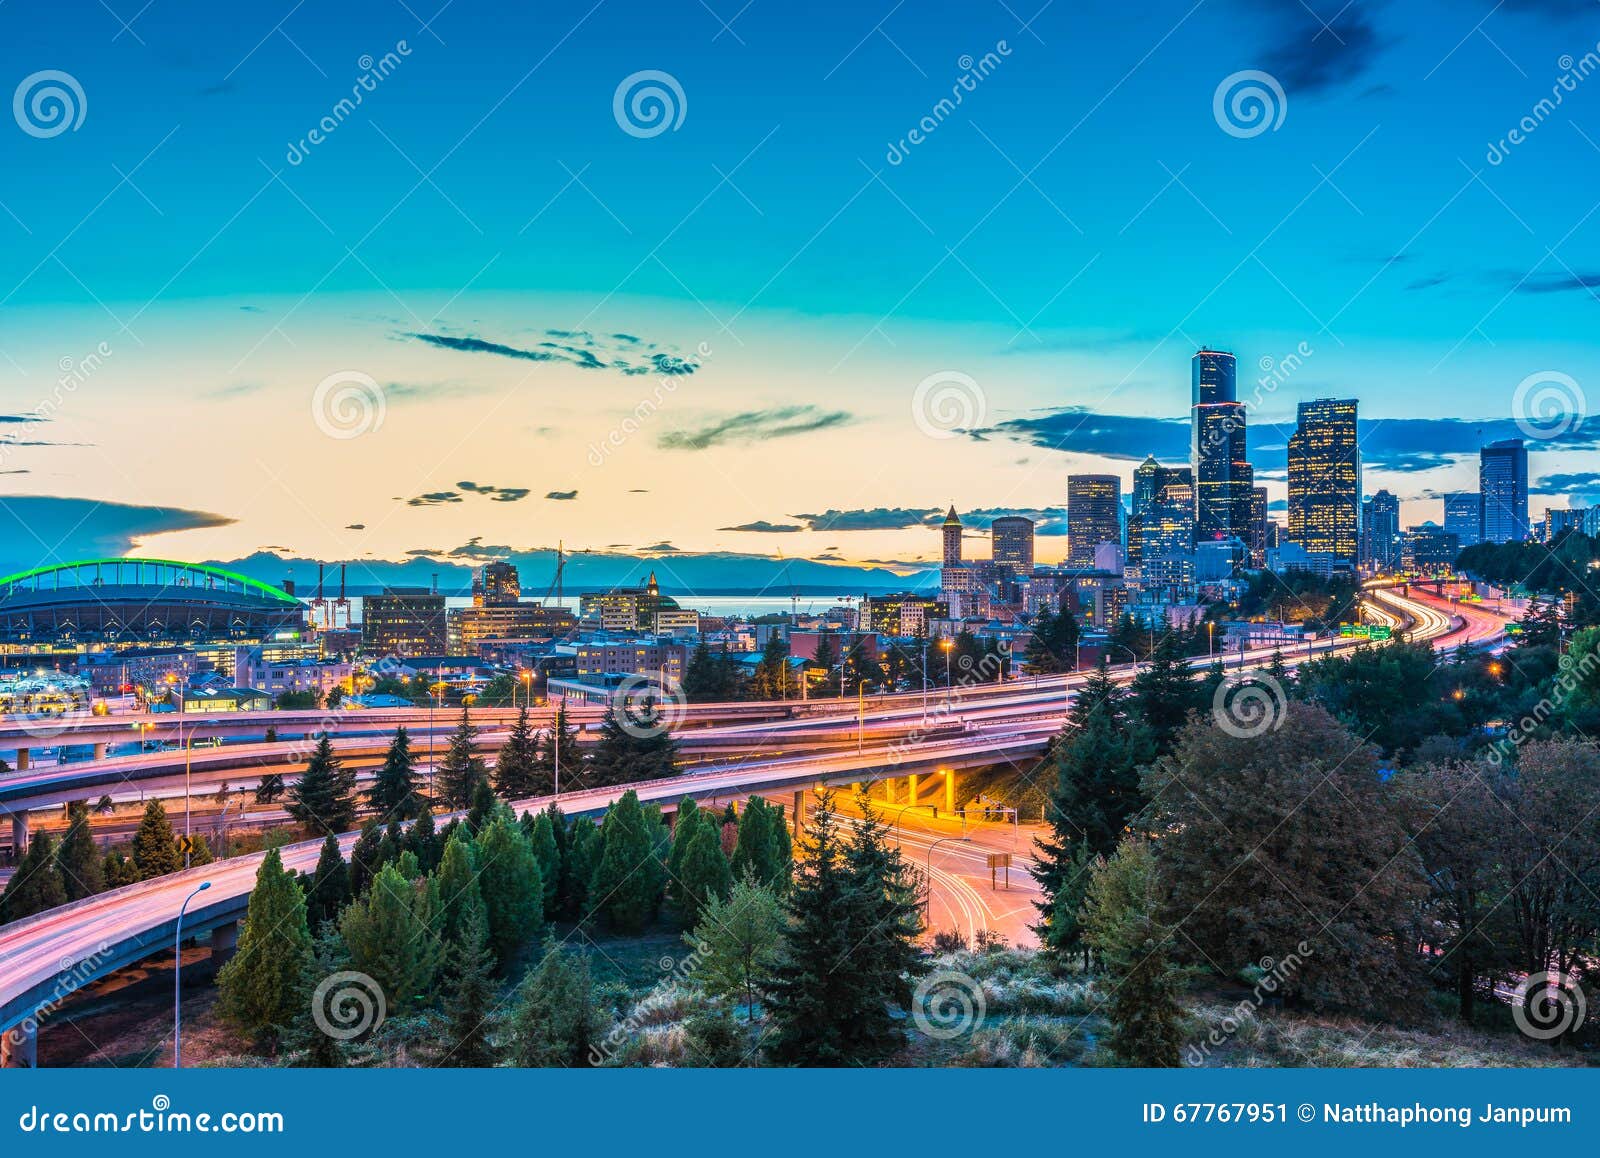 seattle skylines and interstate freeways converge with elliott bay and the waterfront background of in sunset time, seattle, washi